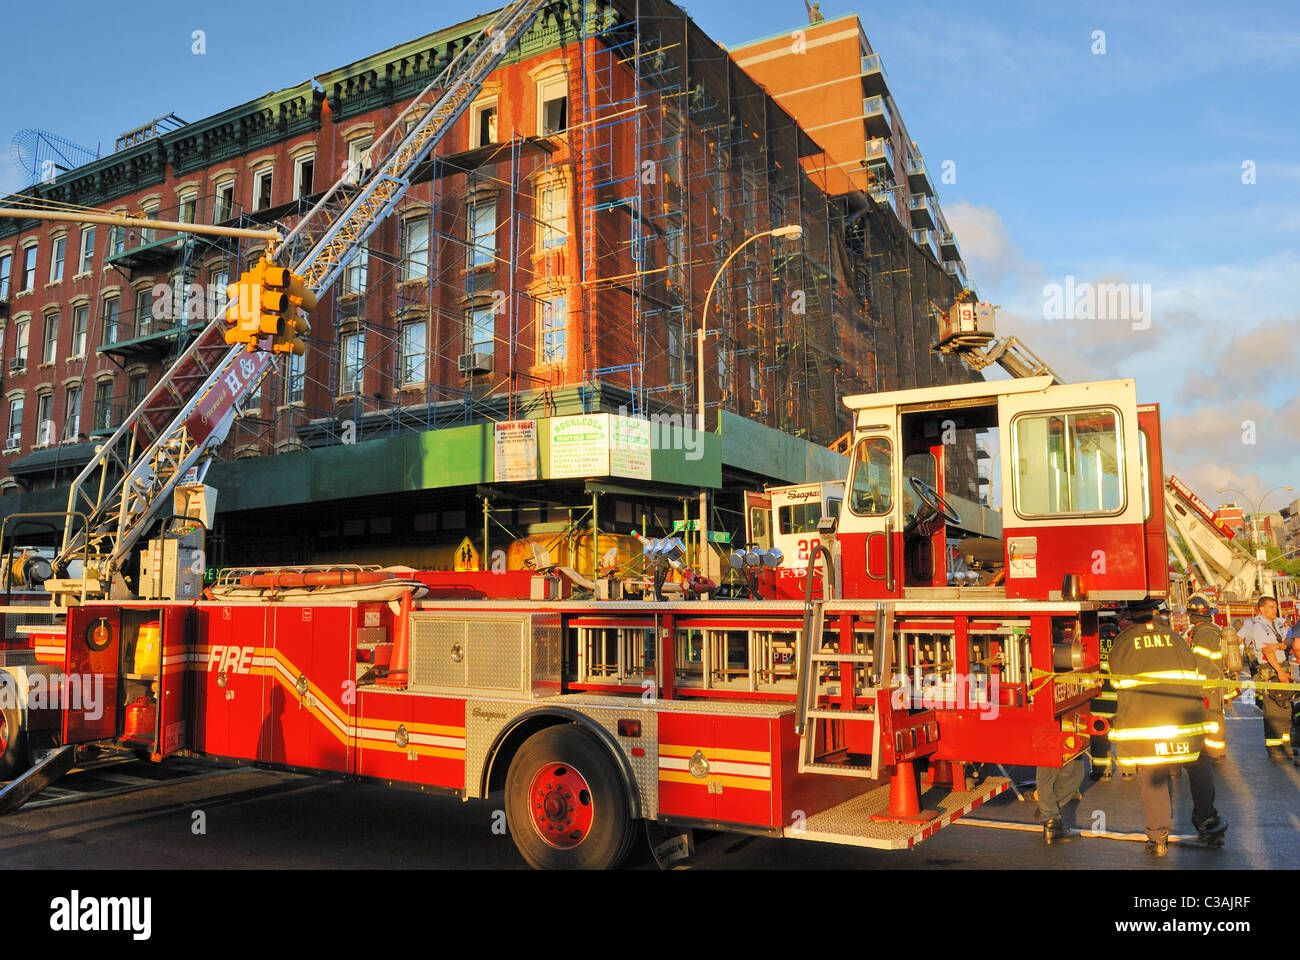 A crew of firefighters responding to a fire on Houston Street in the Lower East Side of New York City. Stock Photo